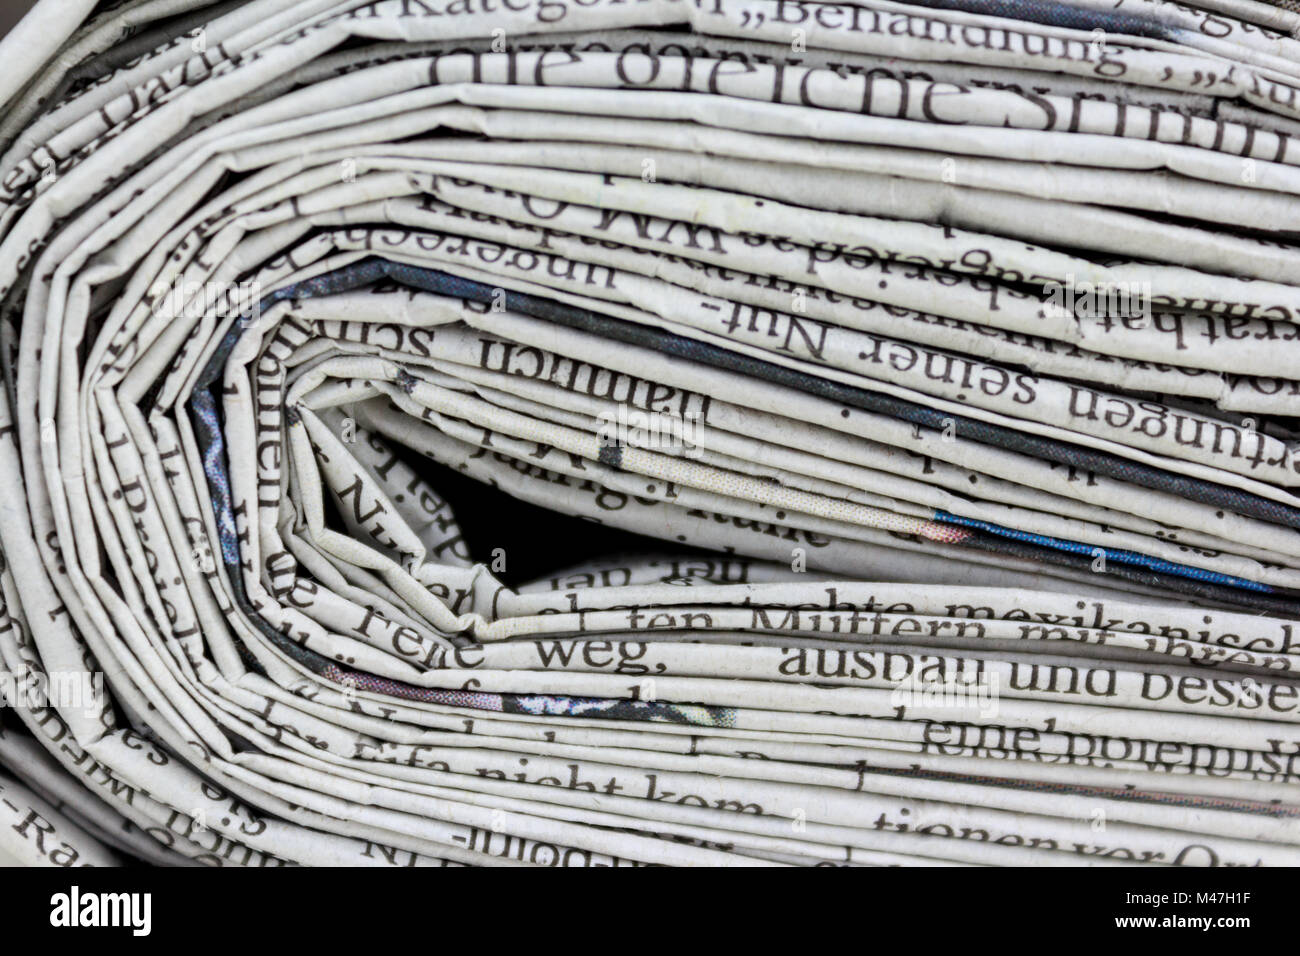 stack of old newspapers, pile of old newspapers Stock Photo